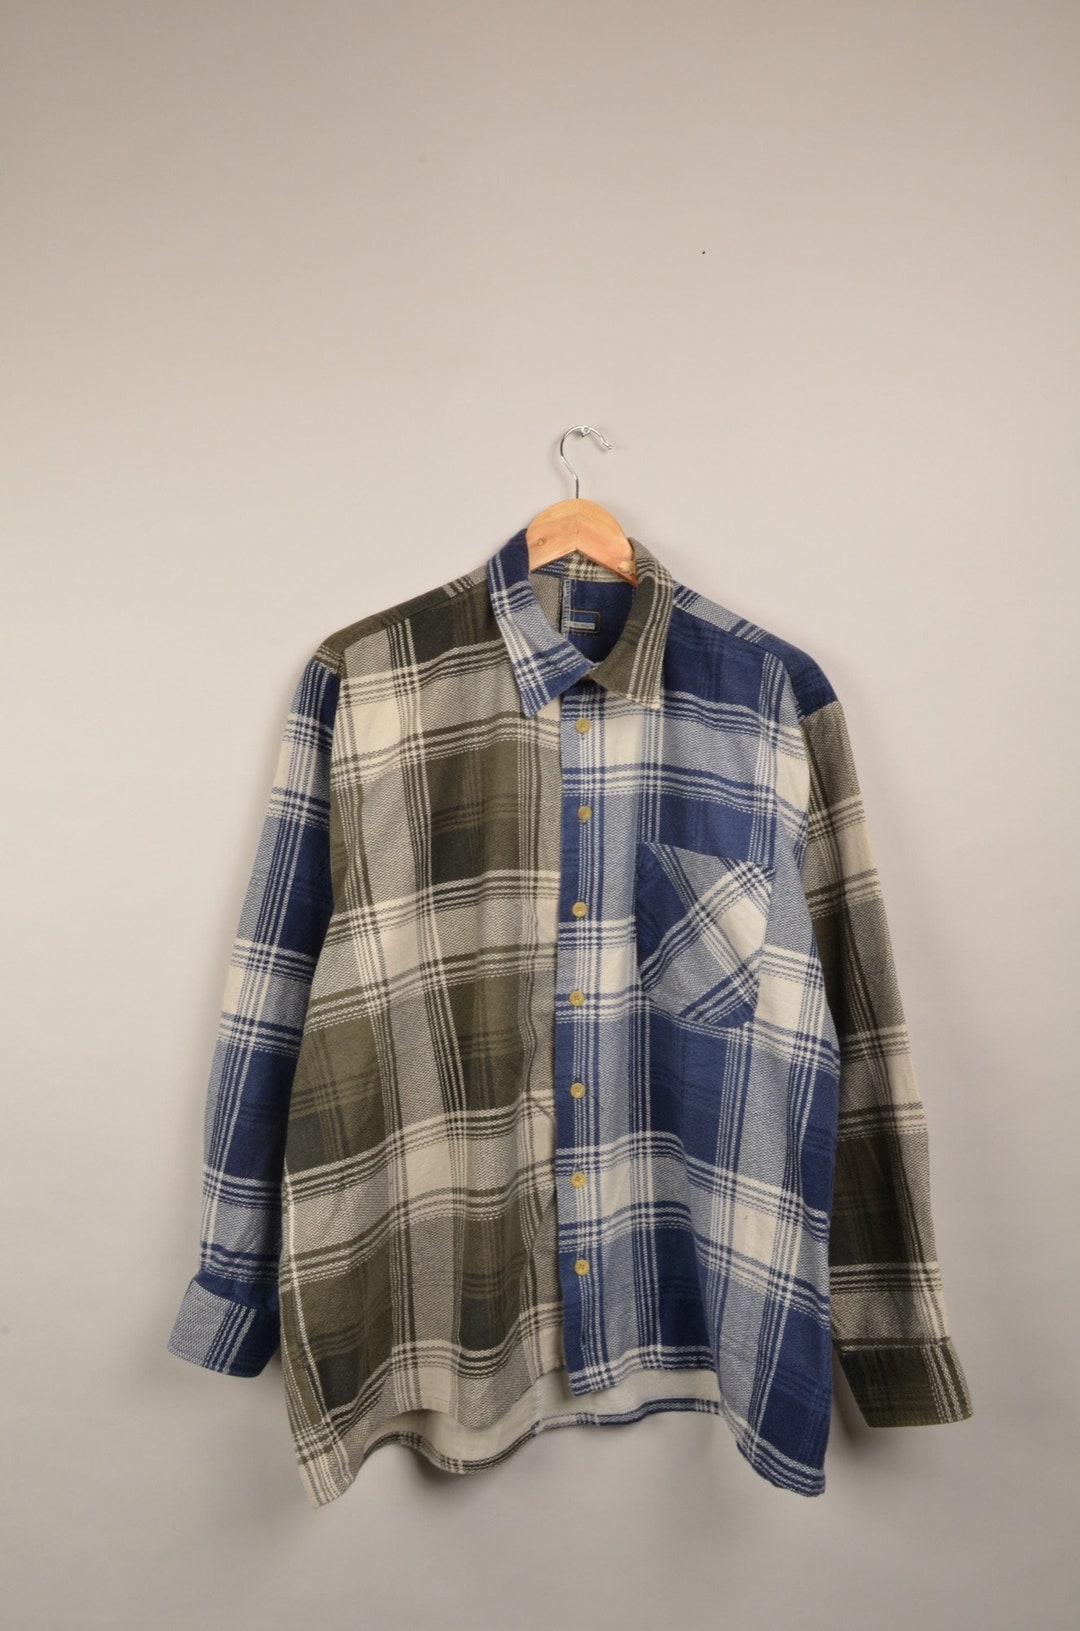 Reworked Vintage 90s Flannel Shirt Oversized Shirt Plaid - Etsy